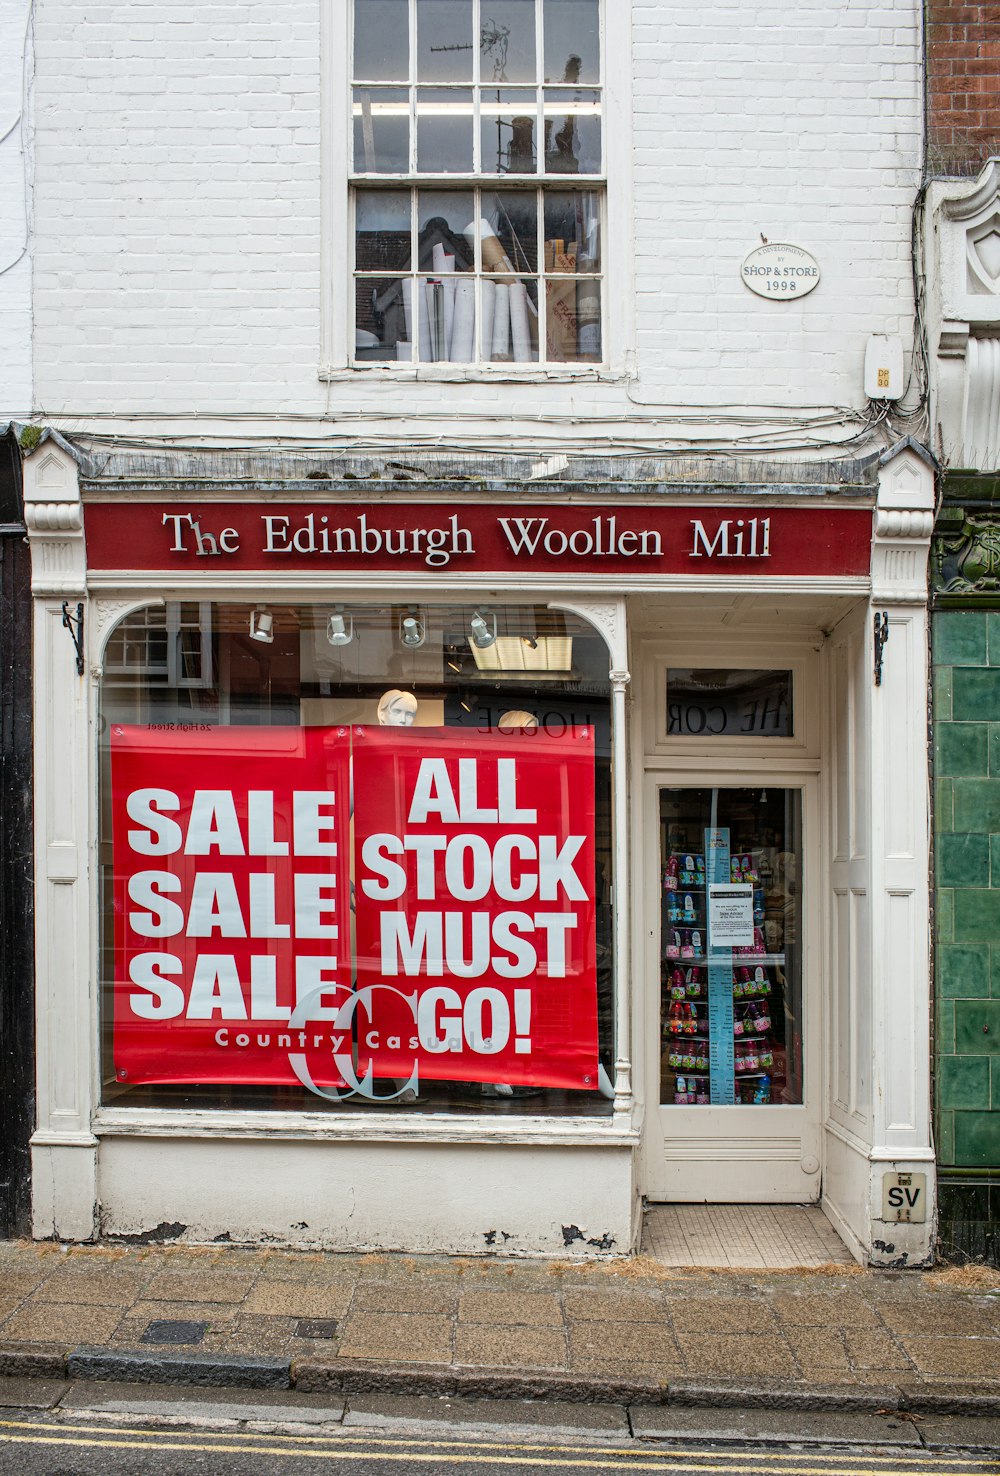 Sale Sale Sale and All Stock Must Go! signs on The Edinburgh Woollen Mill building windows during daytime